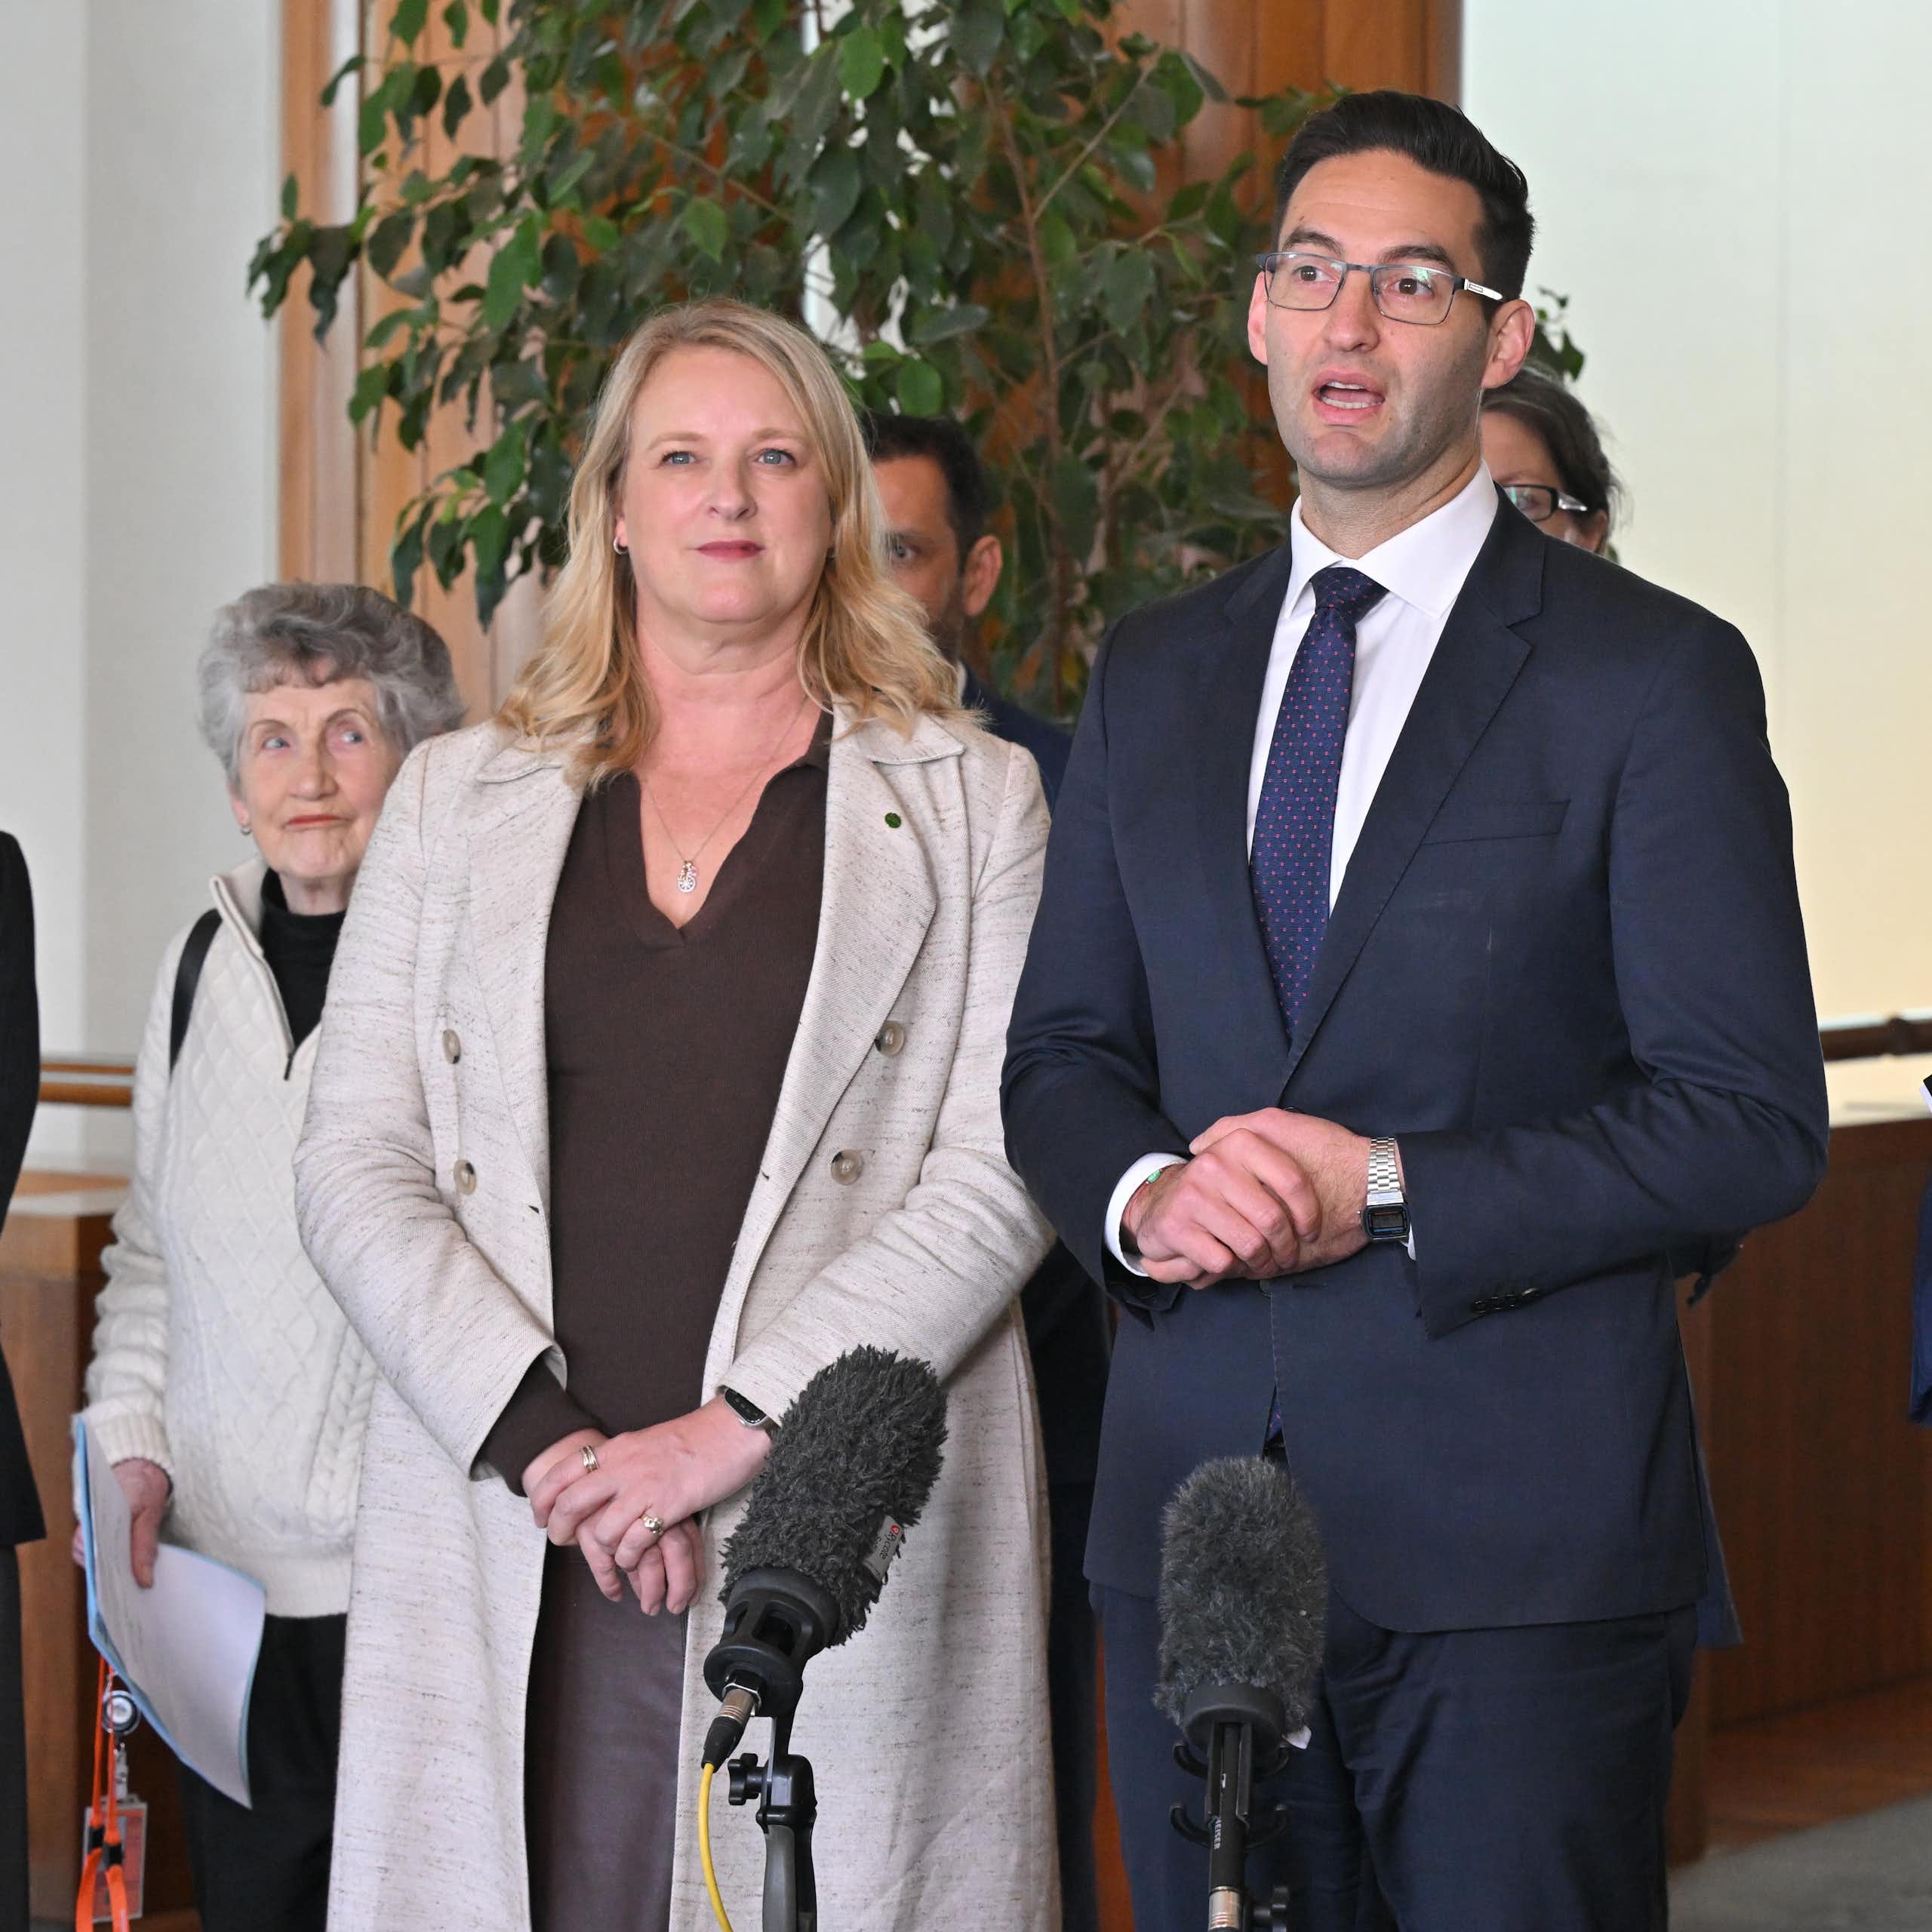 A man in a suit and a woman in a coat stand behind microphones and address the media